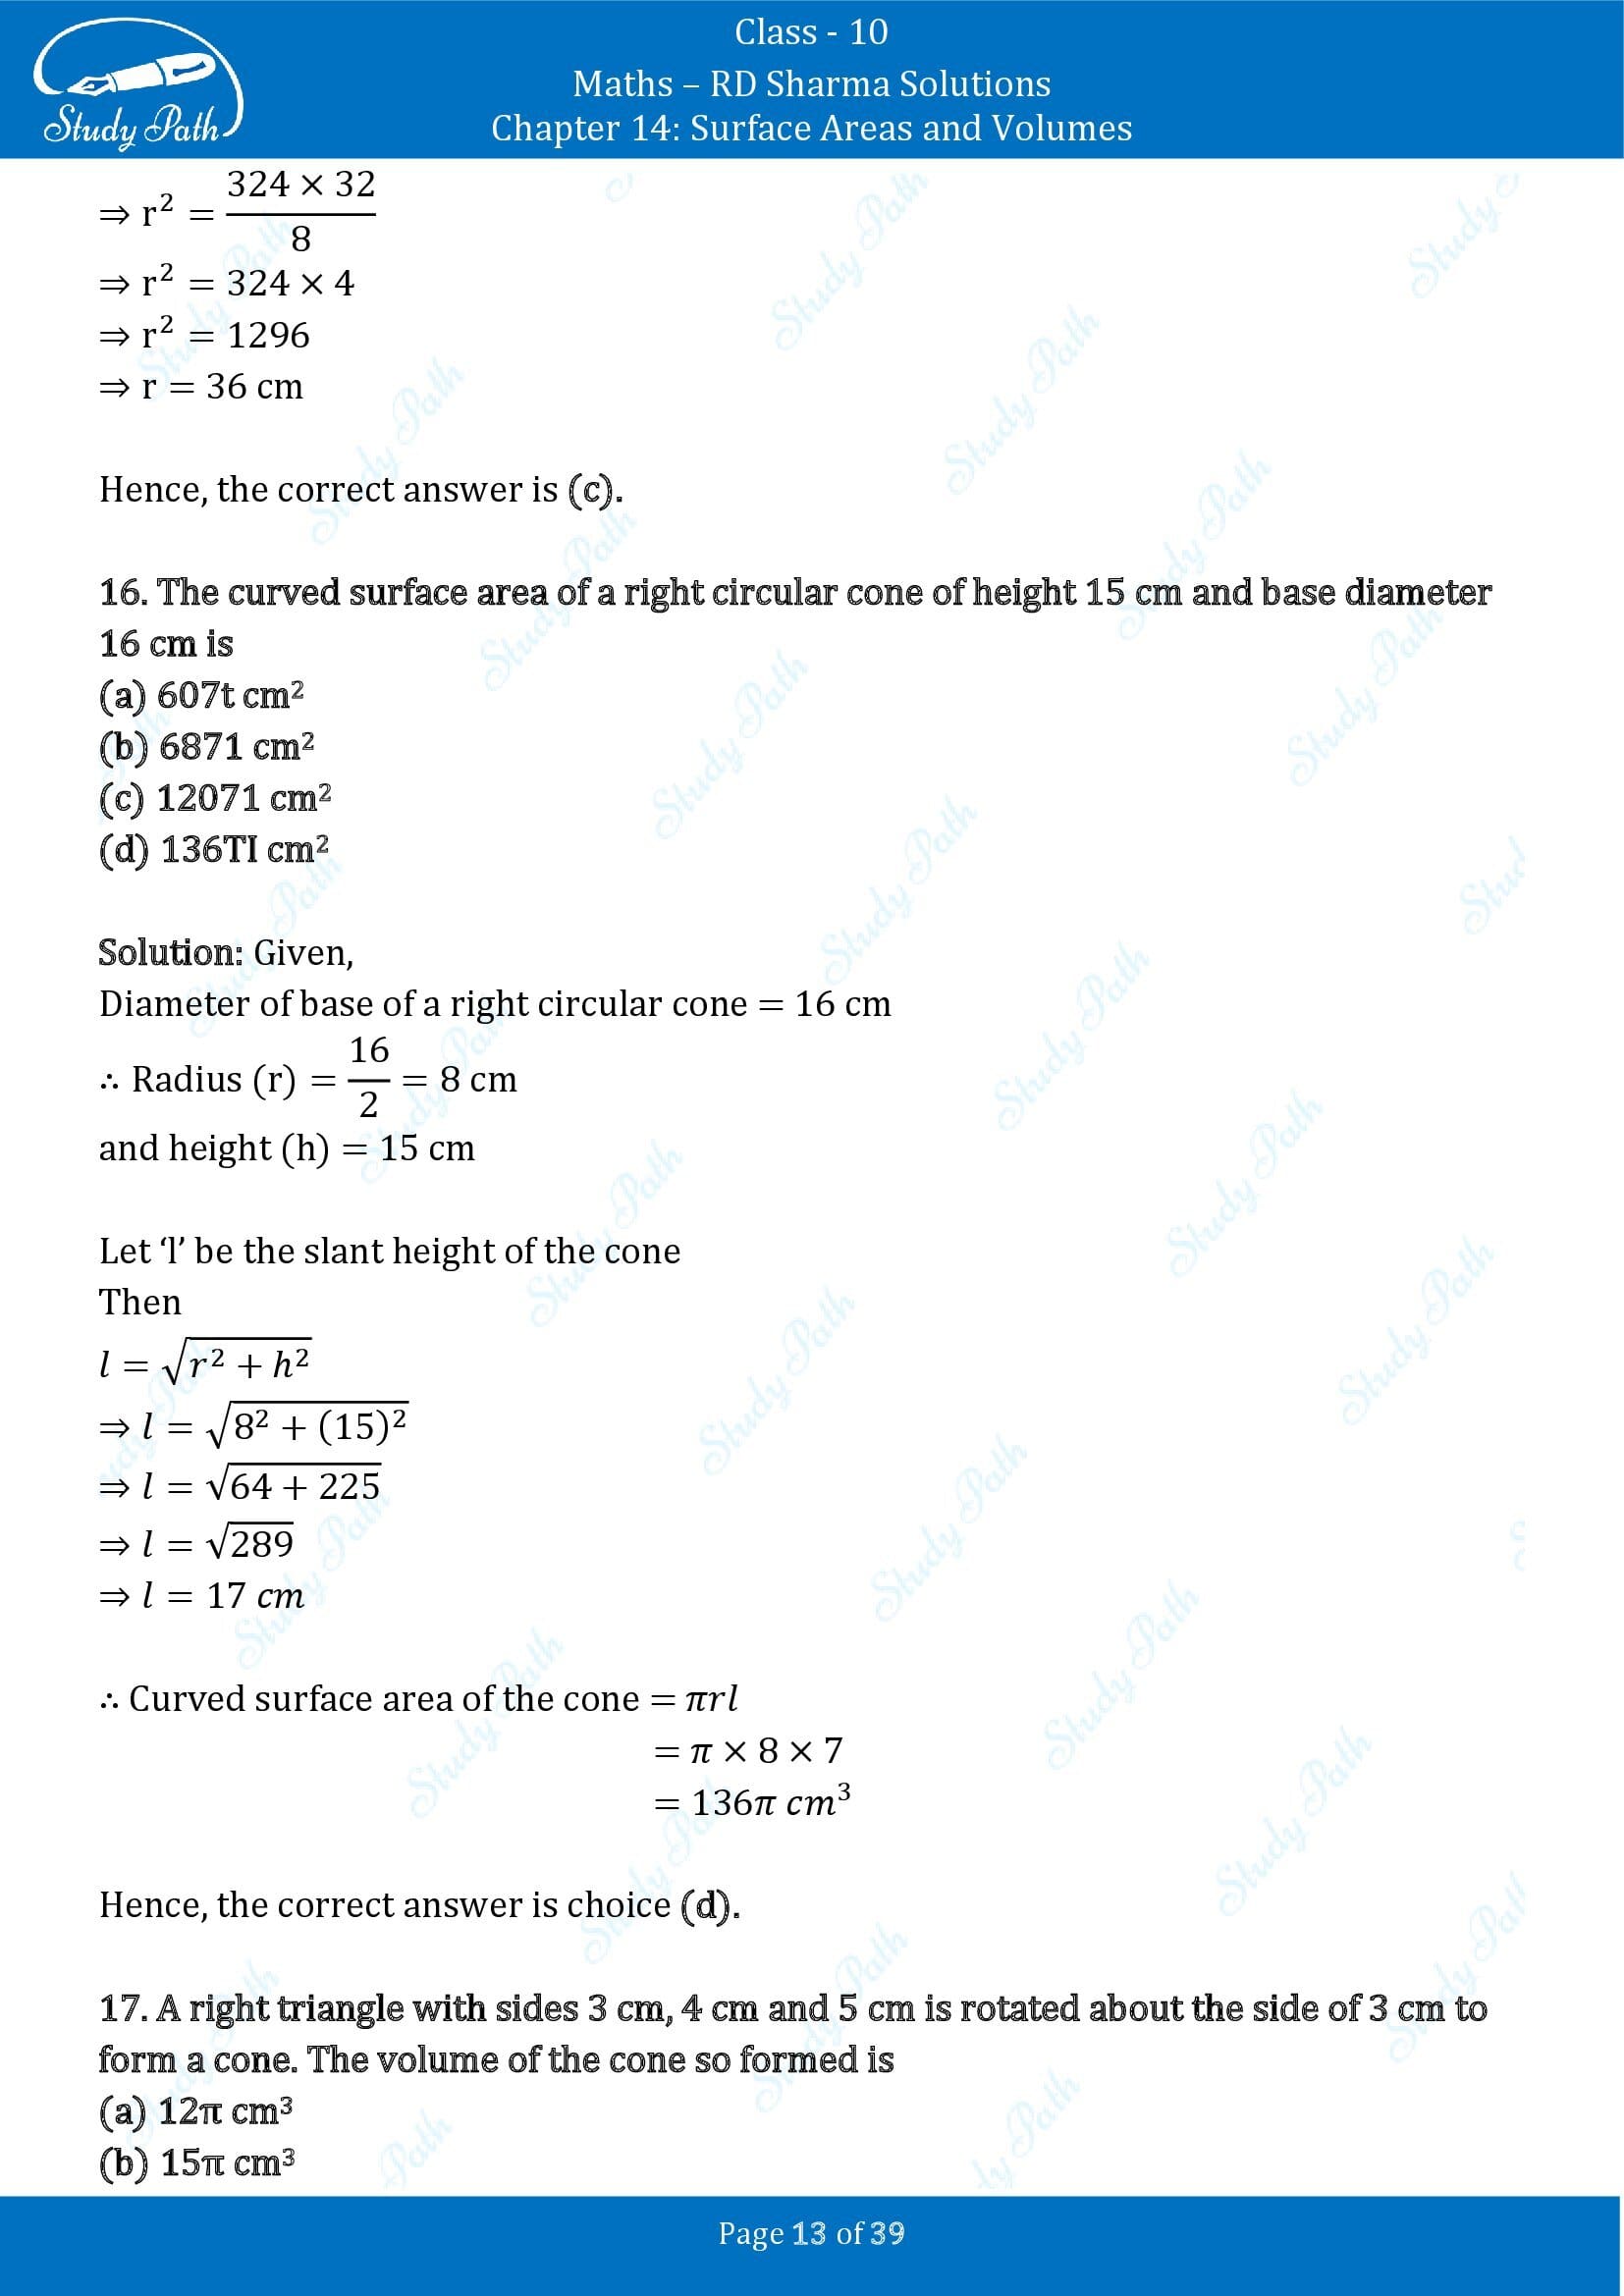 RD Sharma Solutions Class 10 Chapter 14 Surface Areas and Volumes Multiple Choice Question MCQs 00013